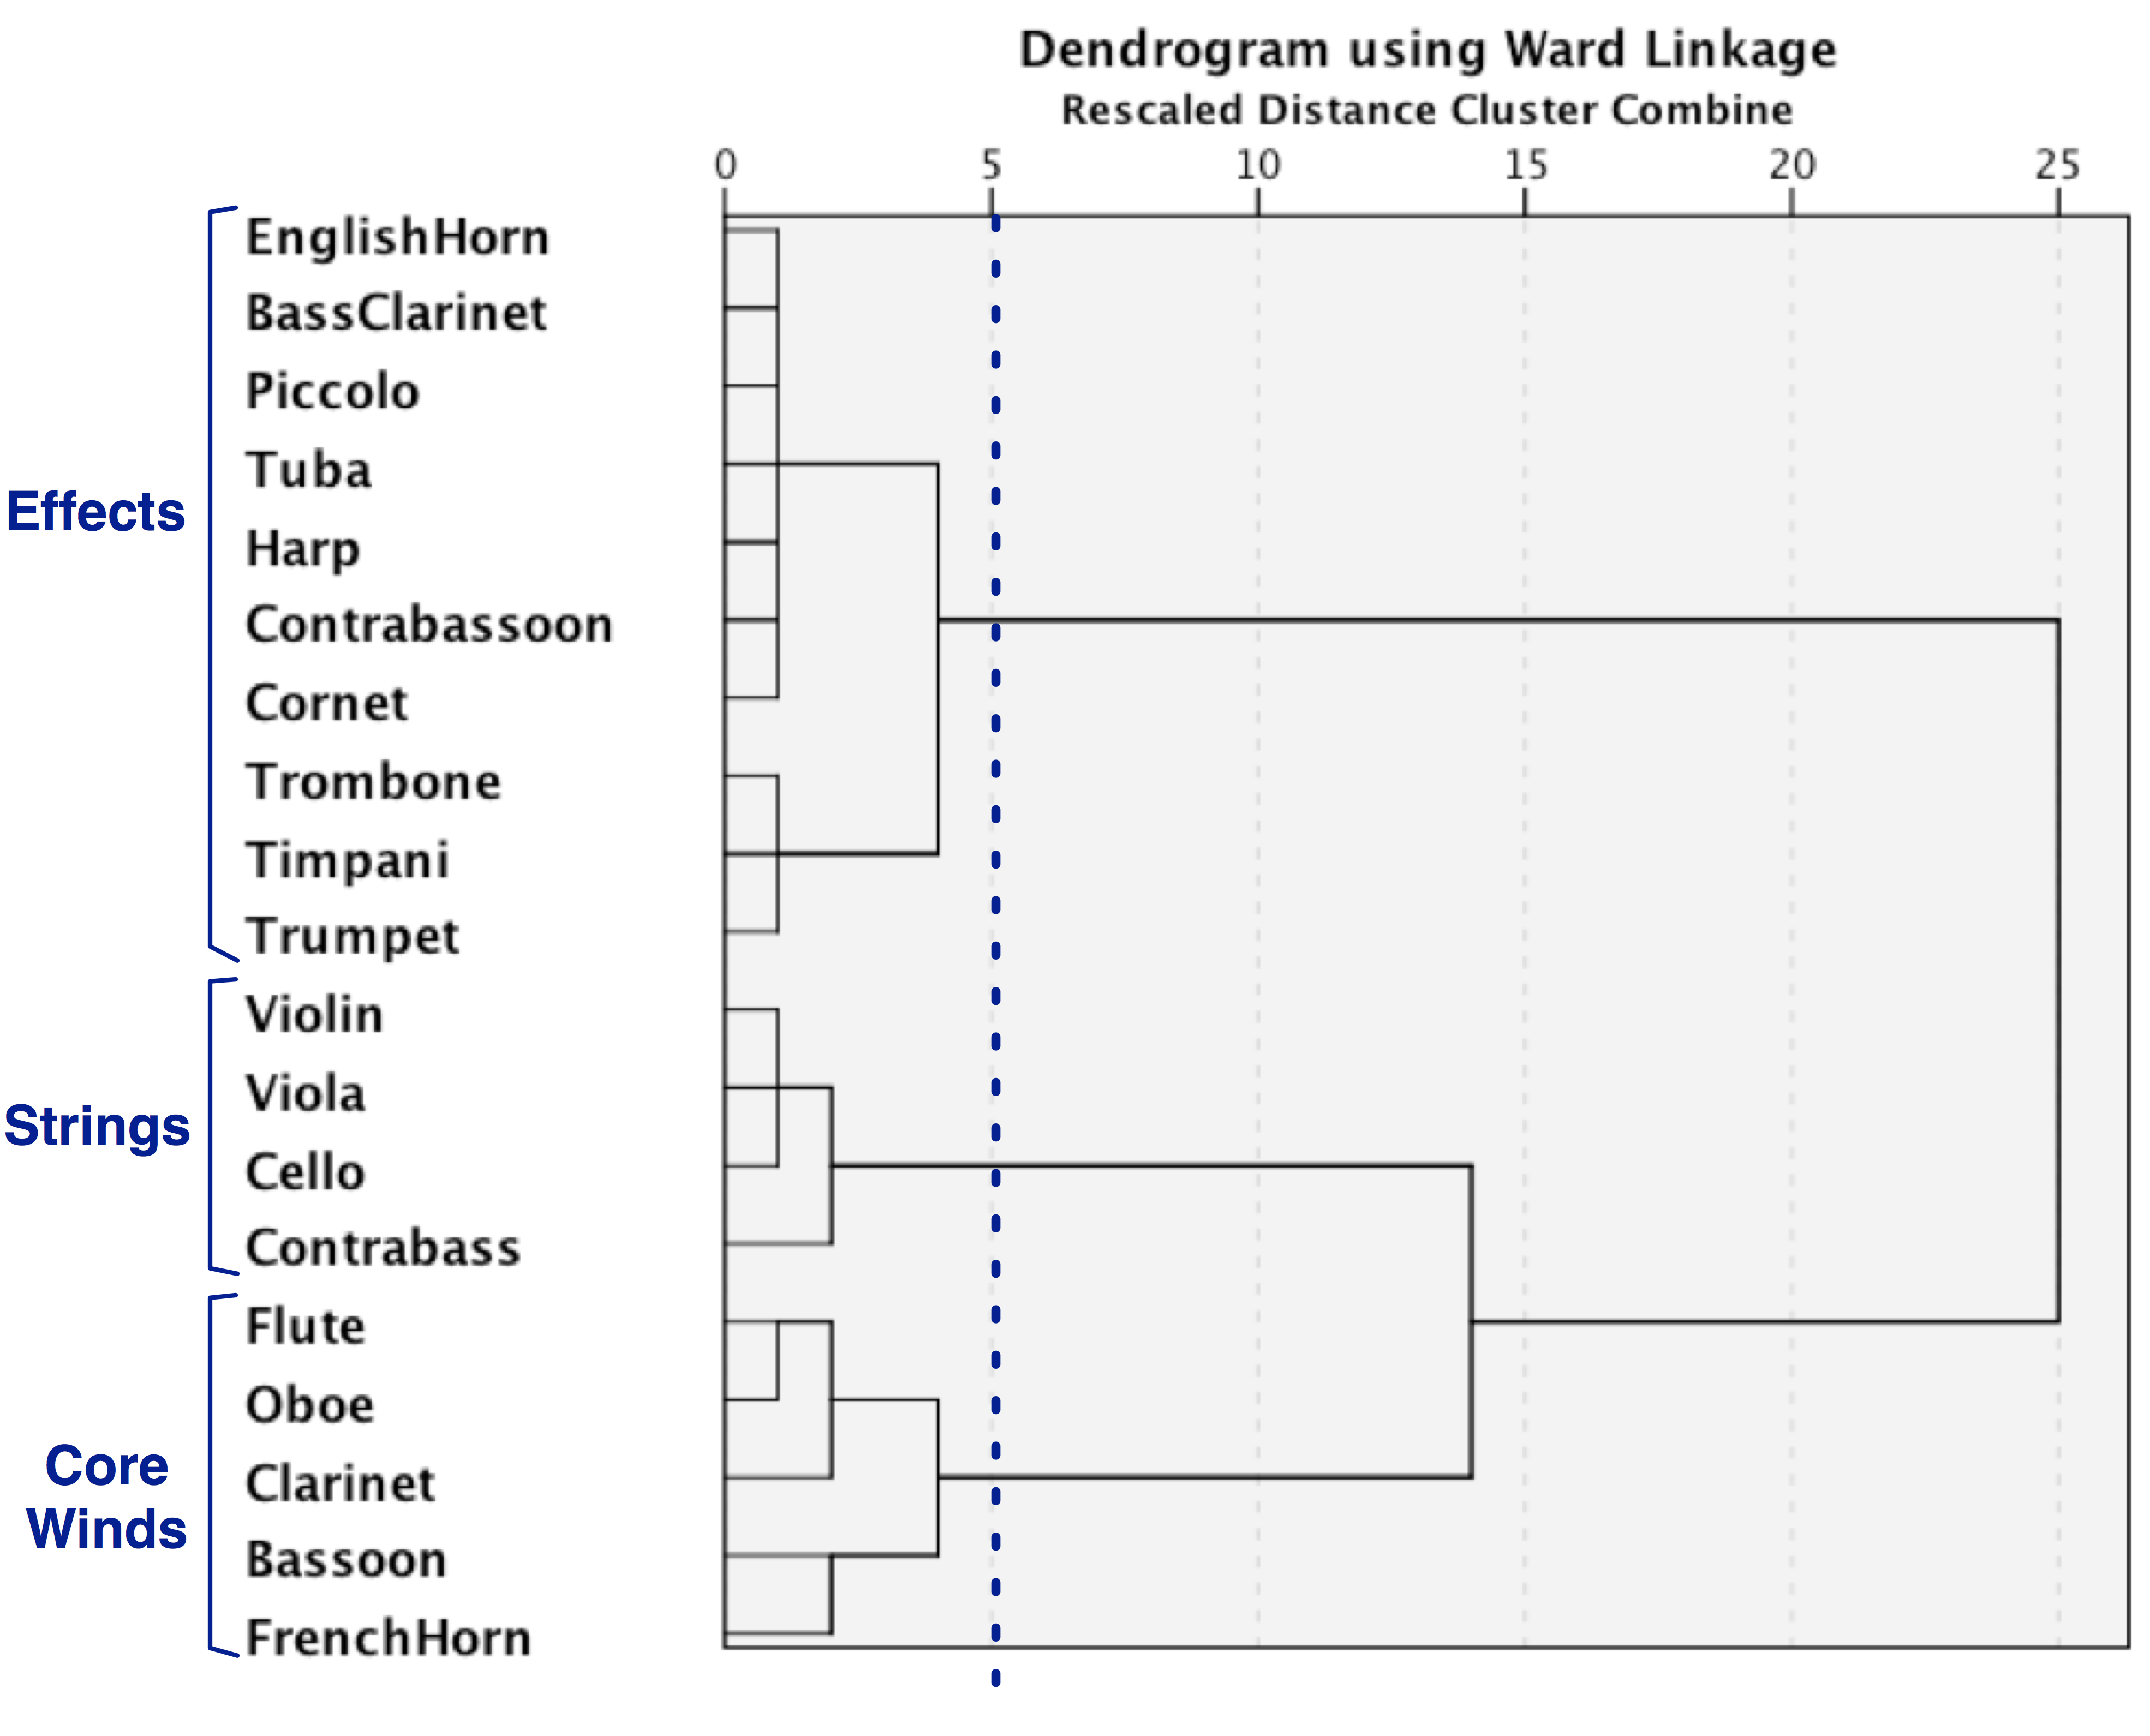 Figure 12 is a dendrogram using Ward Linkage showing hierarchical clustering of typical orchestral instruments from 1701 to 2000